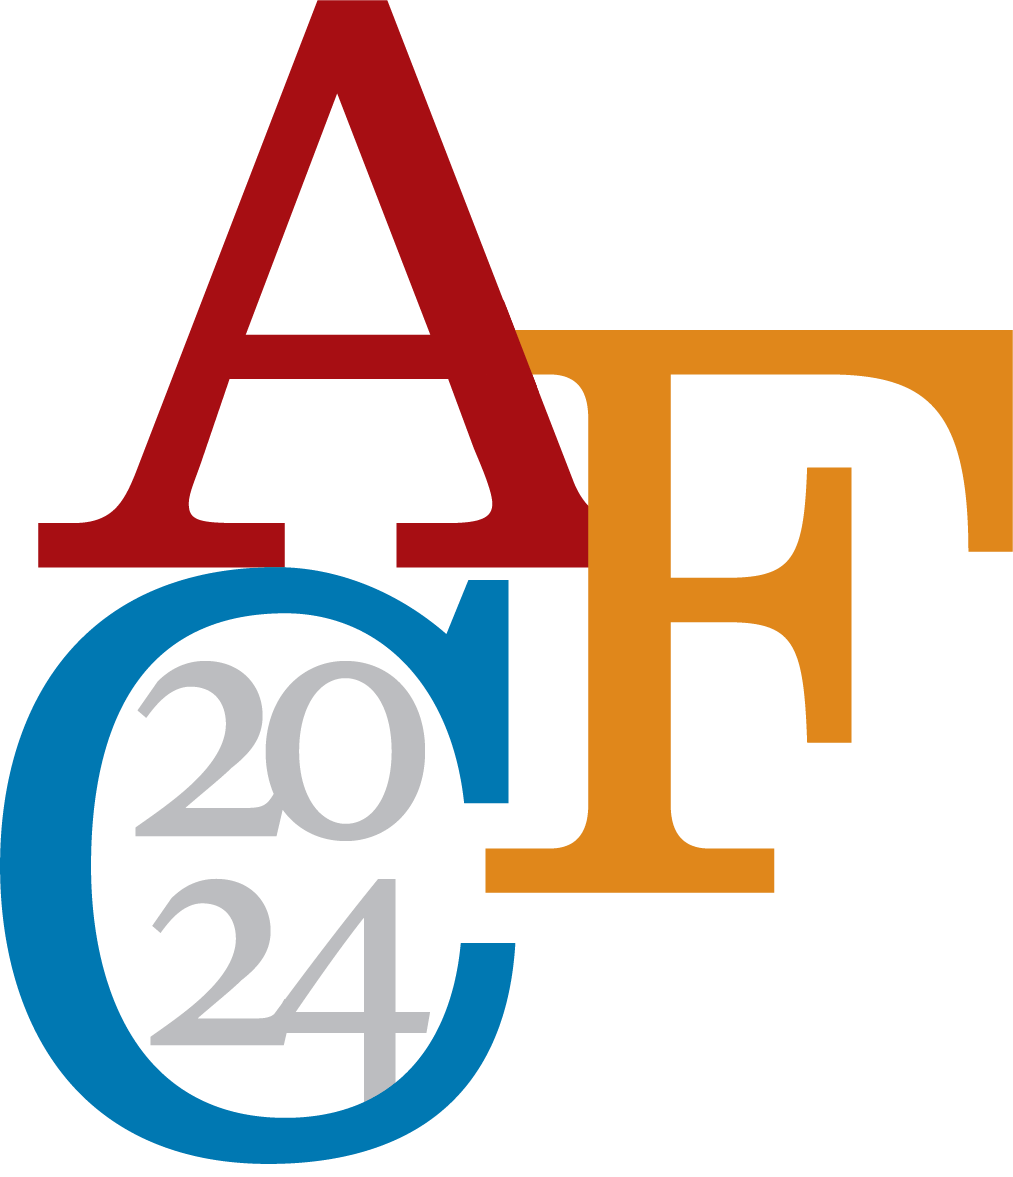 A logo with the letters A, F, and C, and the year "2024"